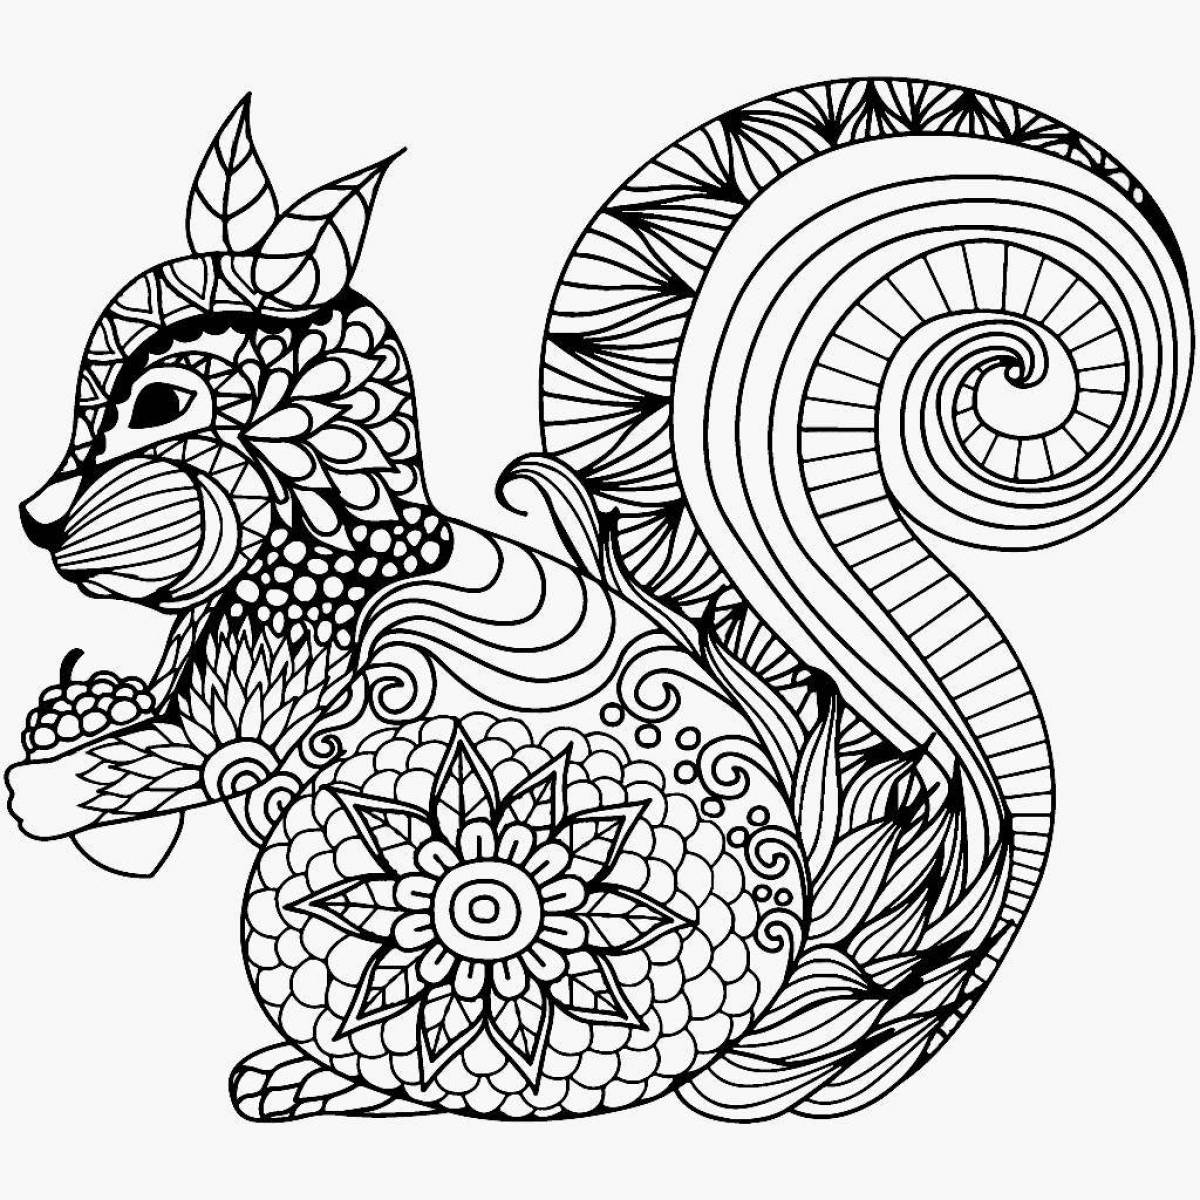 A fascinating anti-stress coloring book for children aged 7